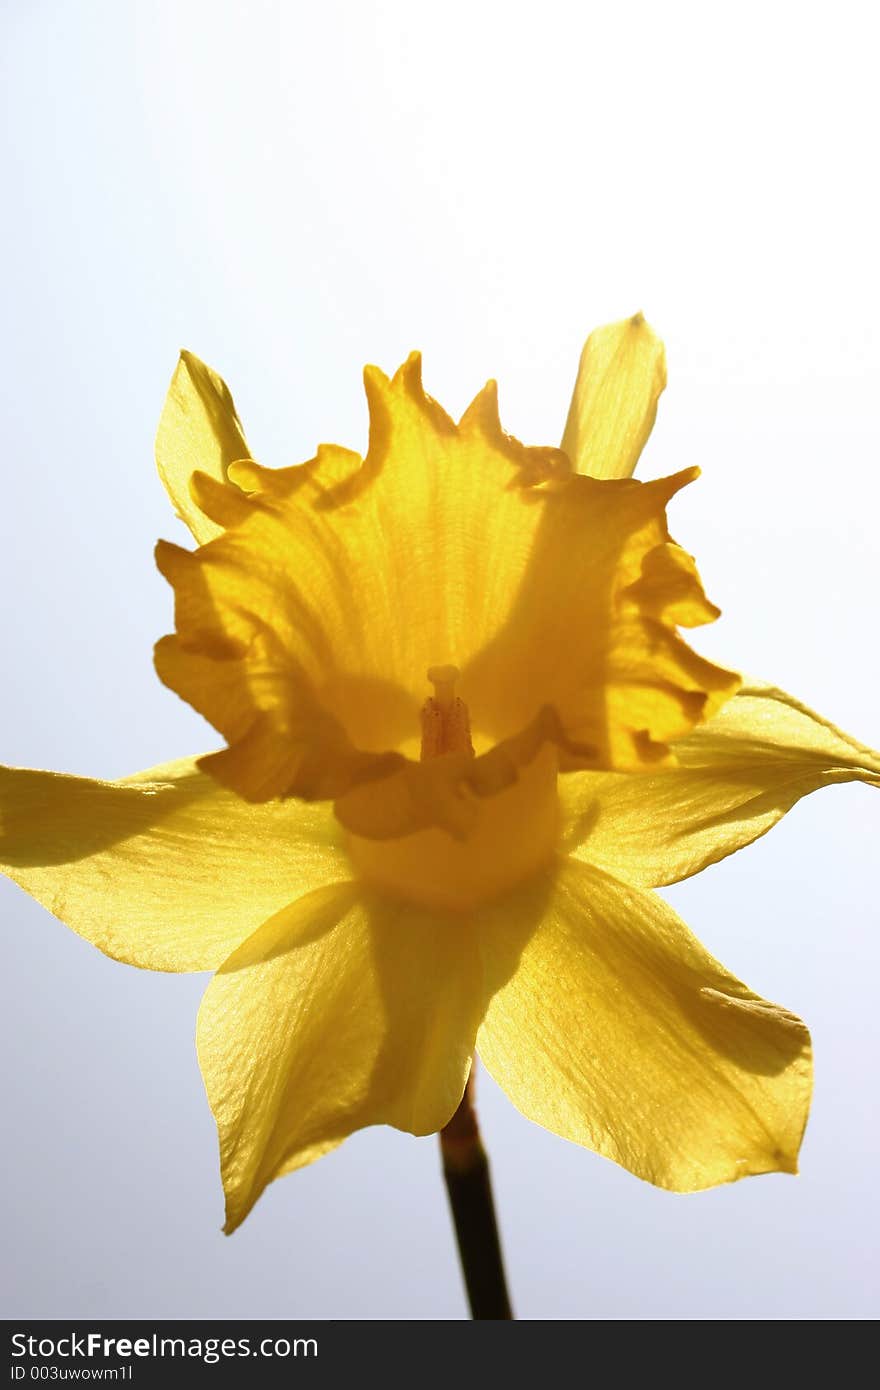 Yellow daffodil with sunlight shining through its petals